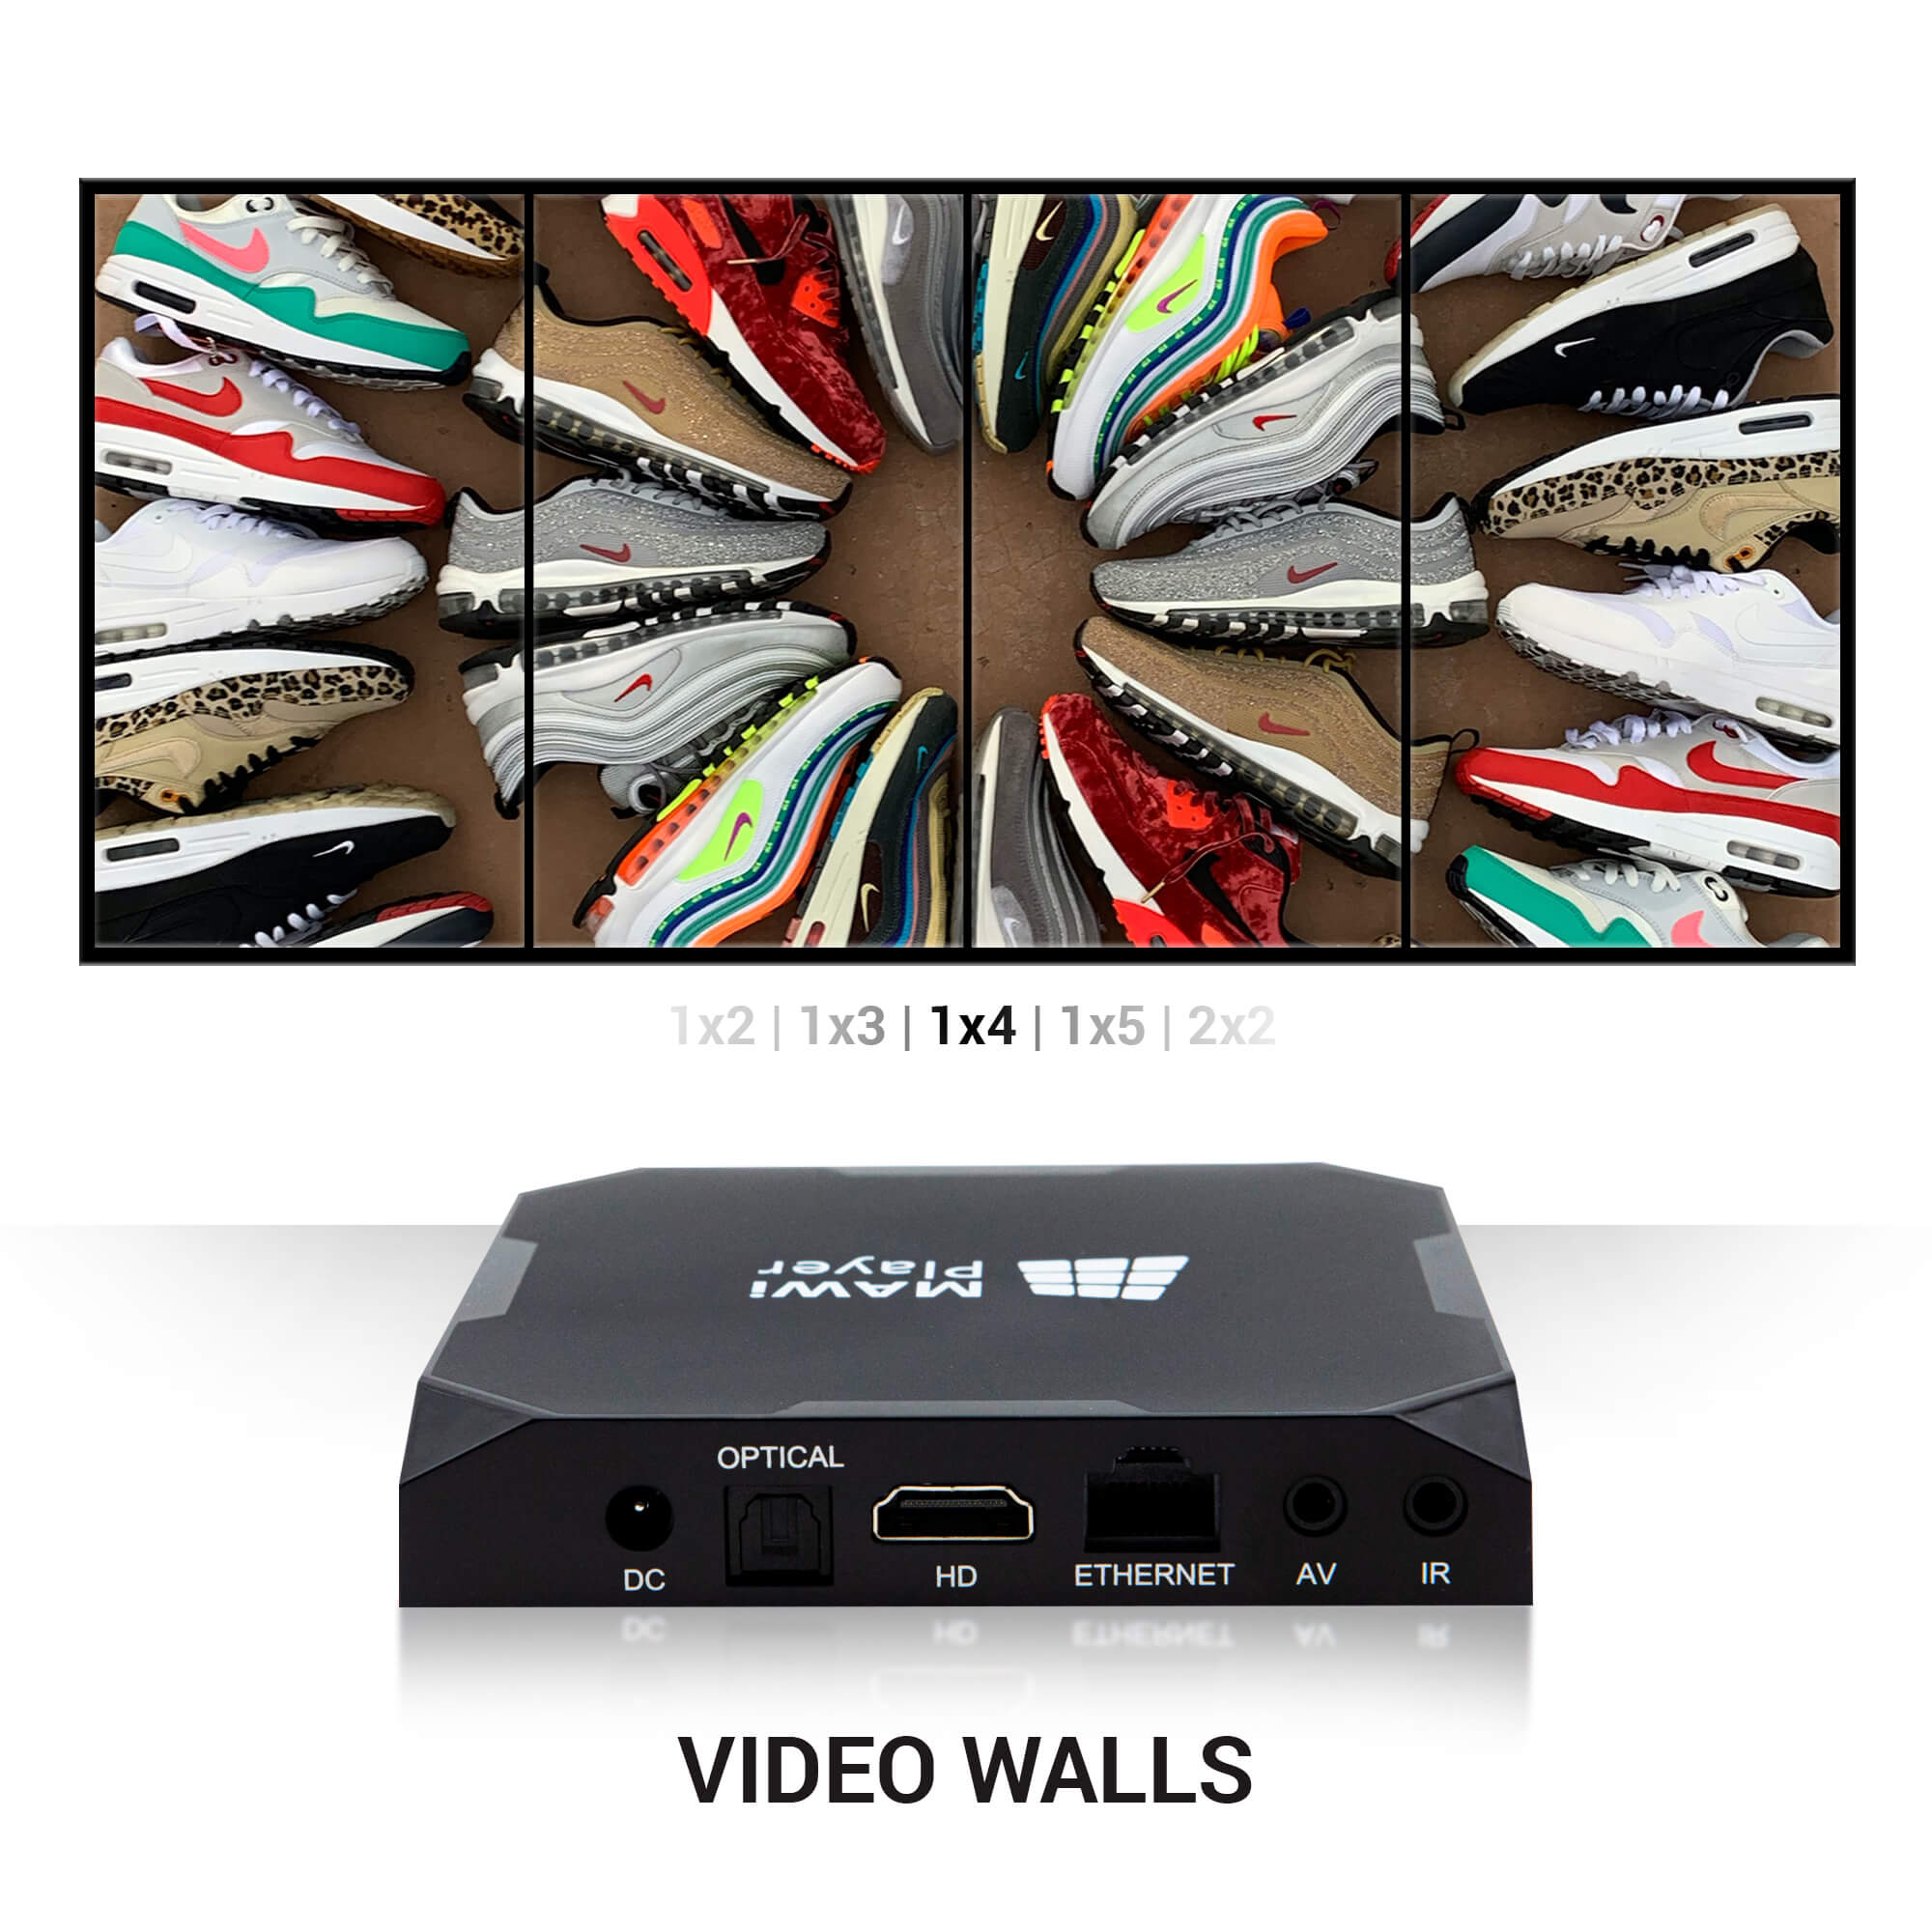 AV Over IP Centerm C75v3 Zero Client MAWi Zero Digital Signage Multiple Monitors Solution by Monitors AnyWhere – HDMI Over LAN Video Extender 